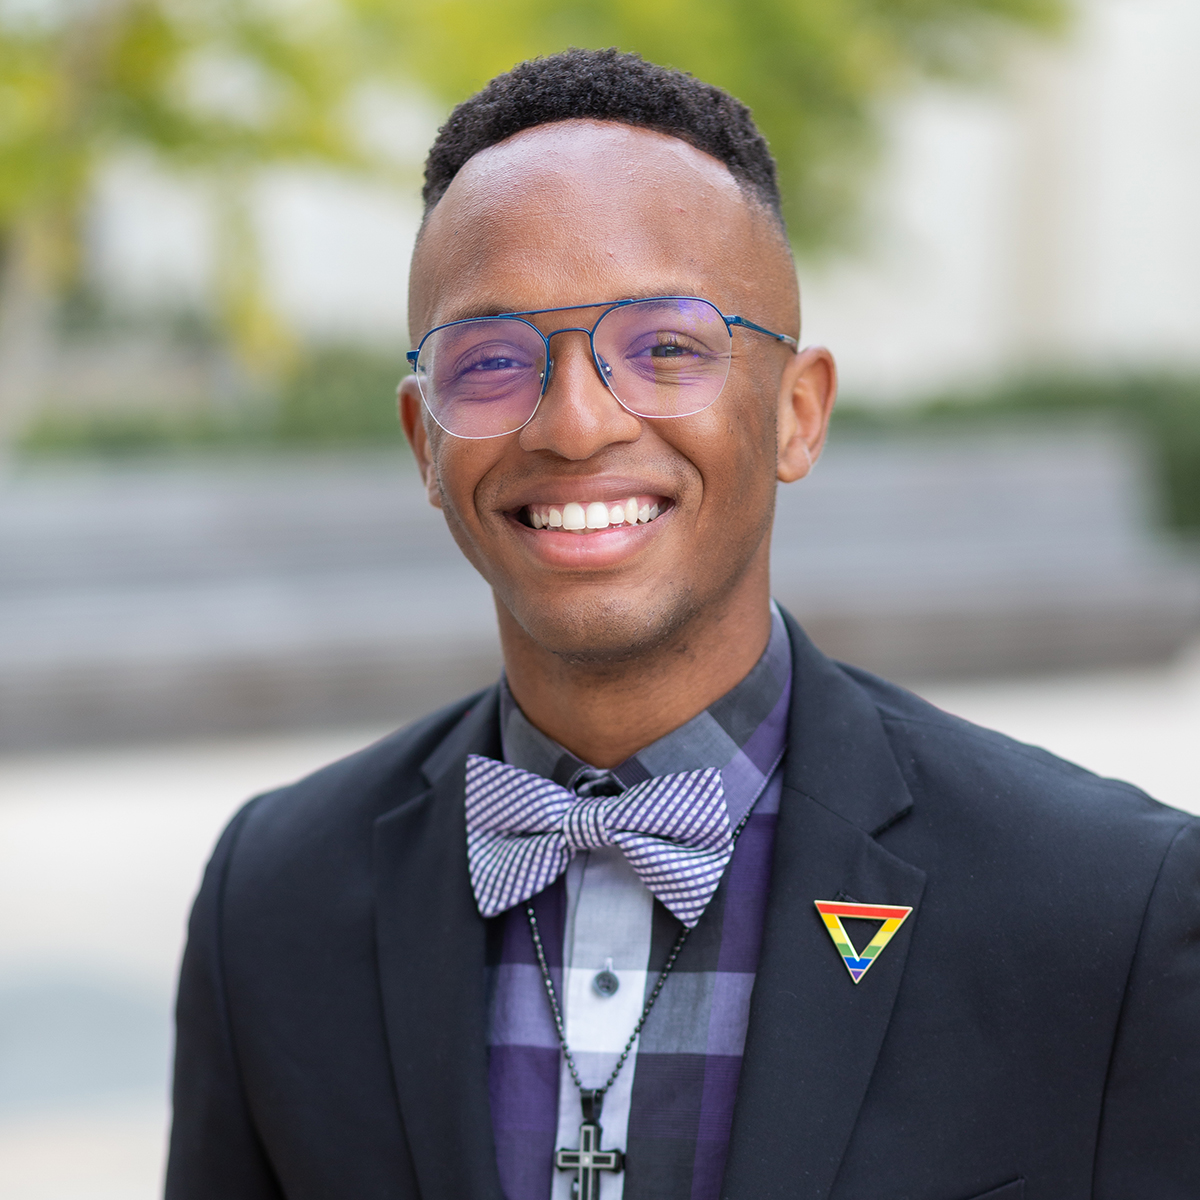 Black male wearing glasses, suit jacket, checkered shirt, bowtie, pride pin, cross necklace